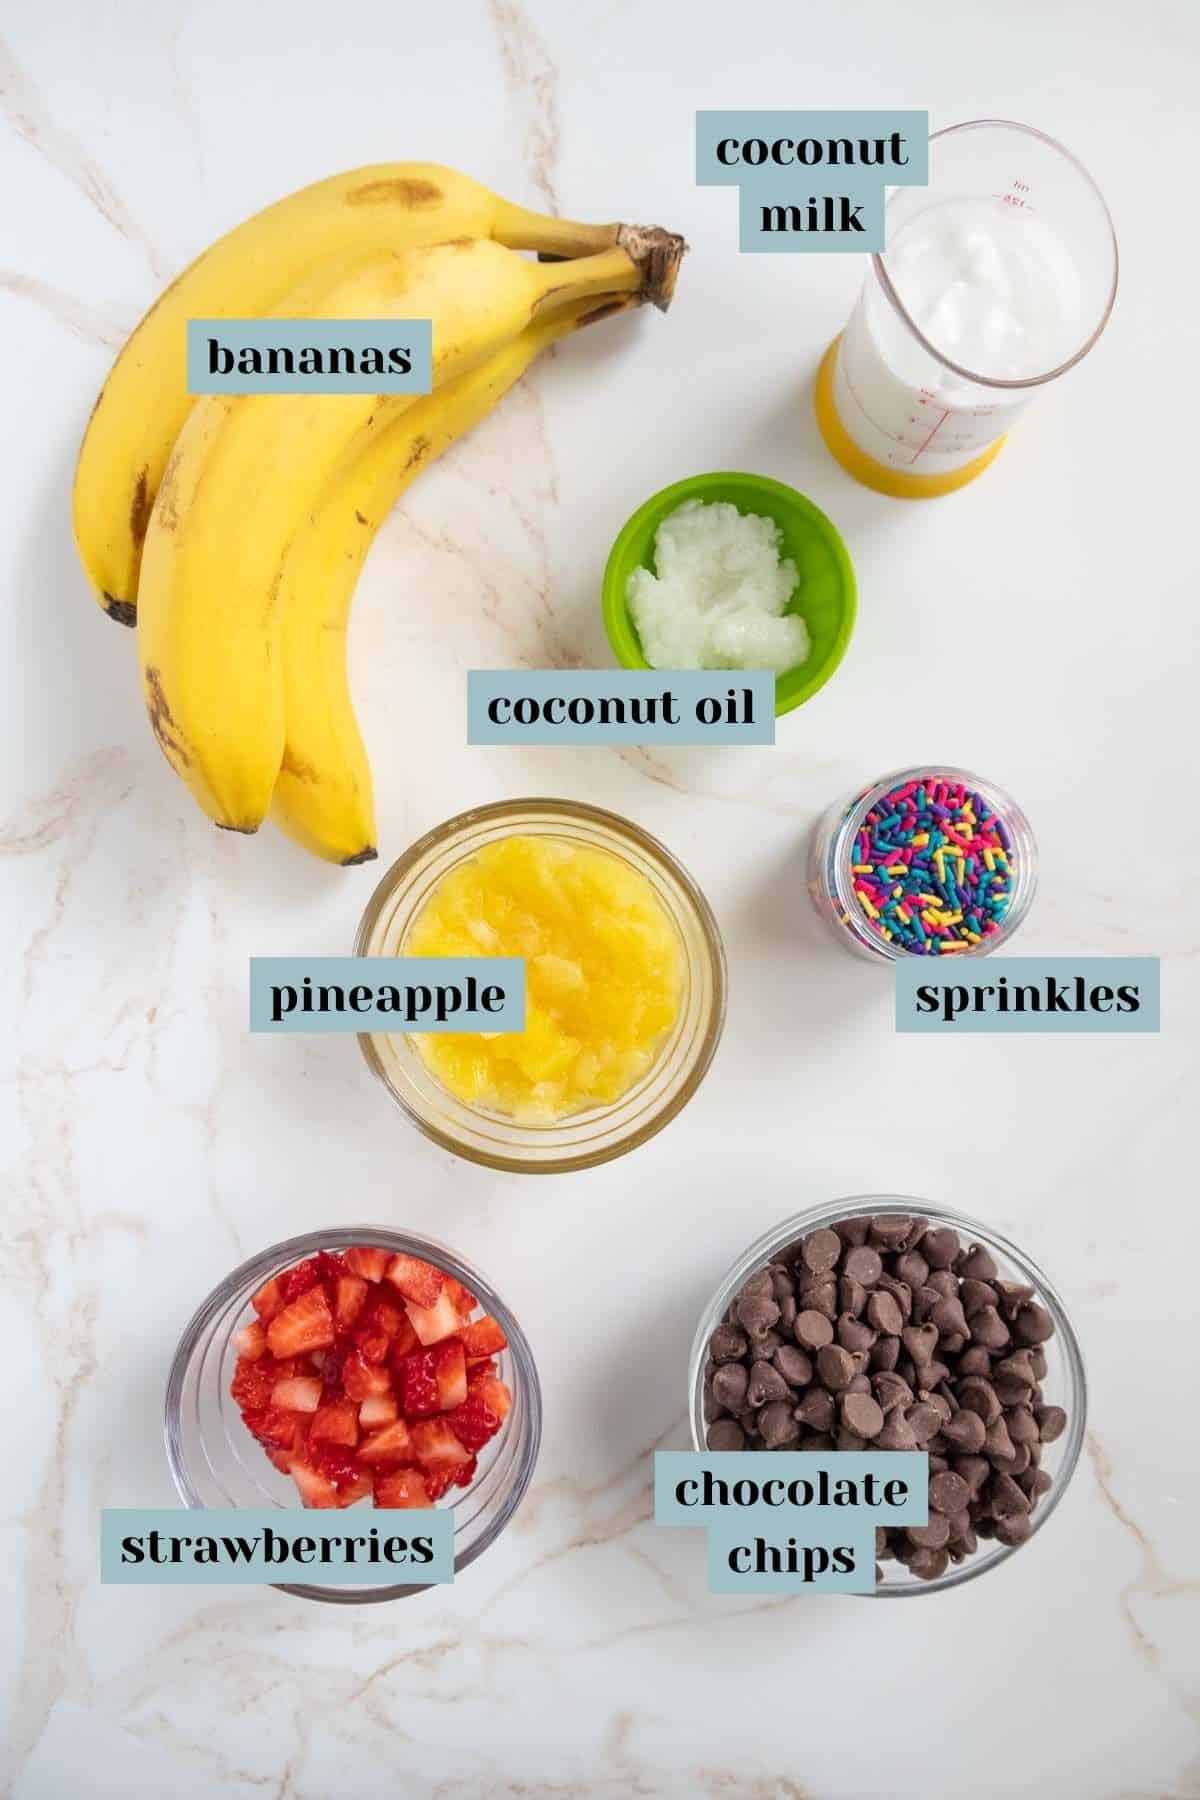 An assortment of smoothie ingredients are laid out, including bananas, coconut milk, coconut oil, pineapple, sprinkles, strawberries, and chocolate chips, each labeled respectively.